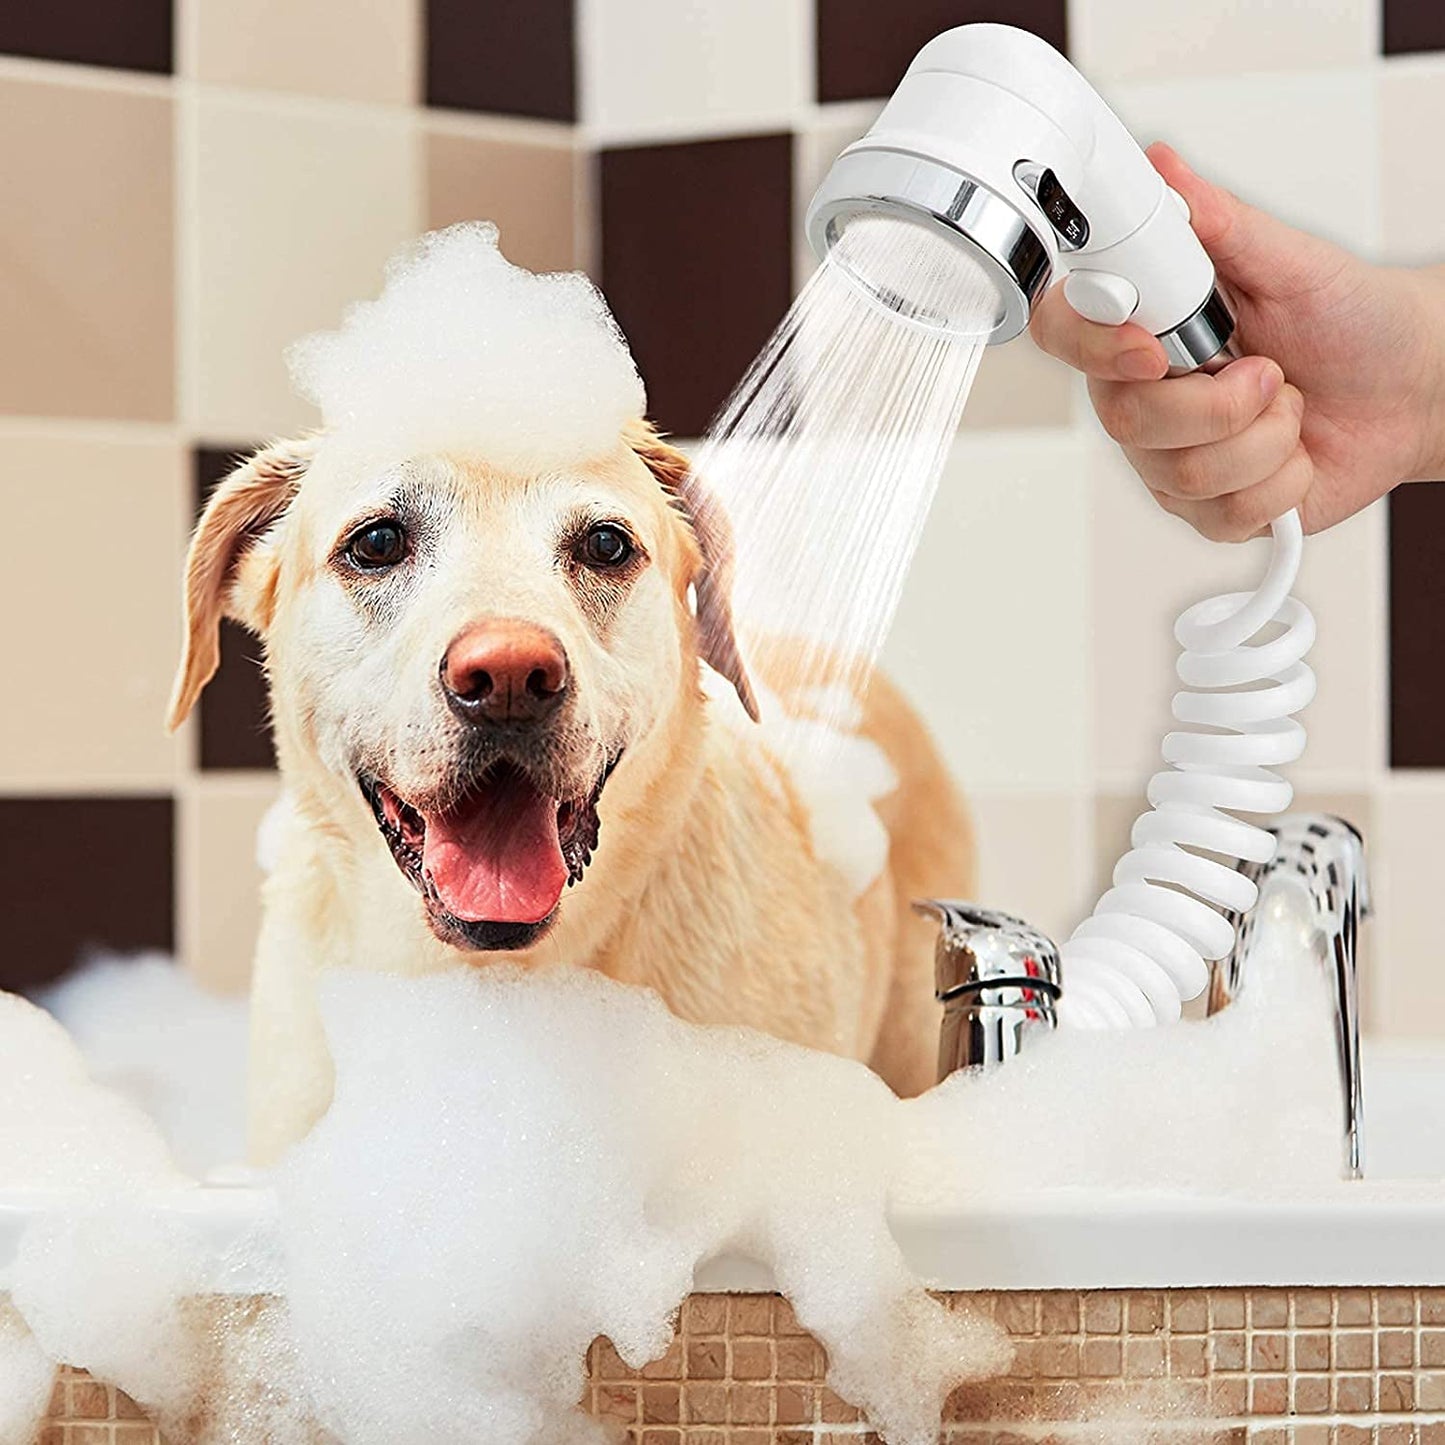 ZCONIEY Sink Faucet Sprayer Attachment, Shower Head Attaches to Tub Faucet, Dog Bathing Hose Shower Set for Laundry Bathroom Kitchen